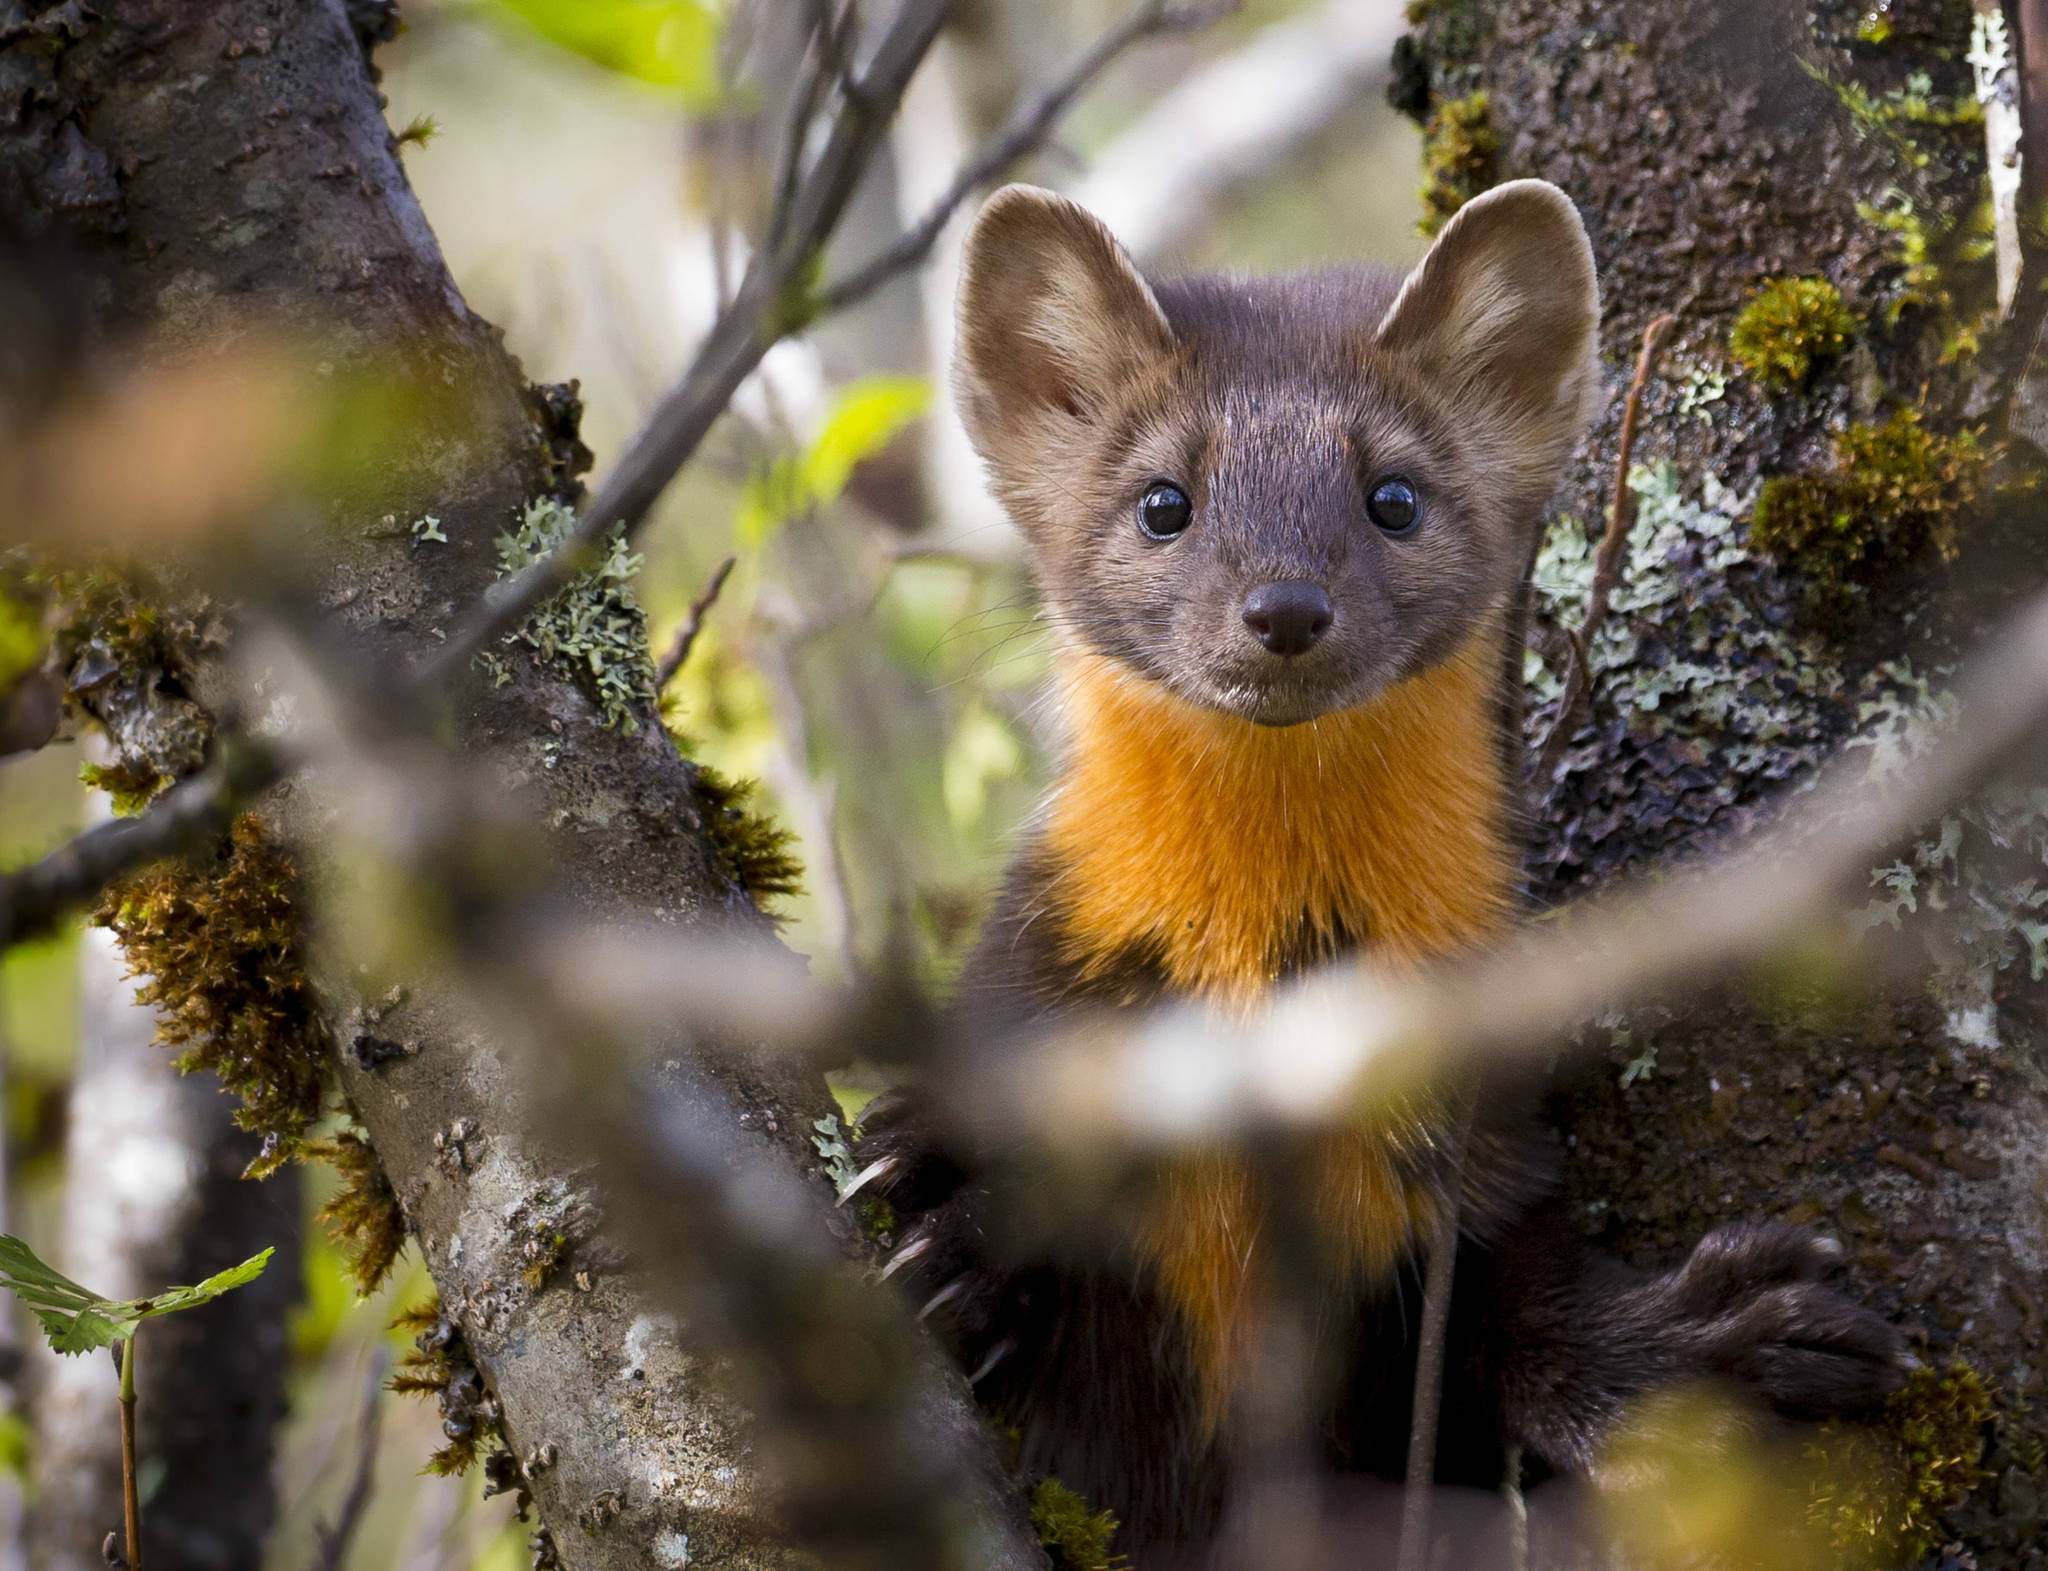 This marten was surprised to see the photographer on the trail and took to the trees. (Photo by Matt Knutson)